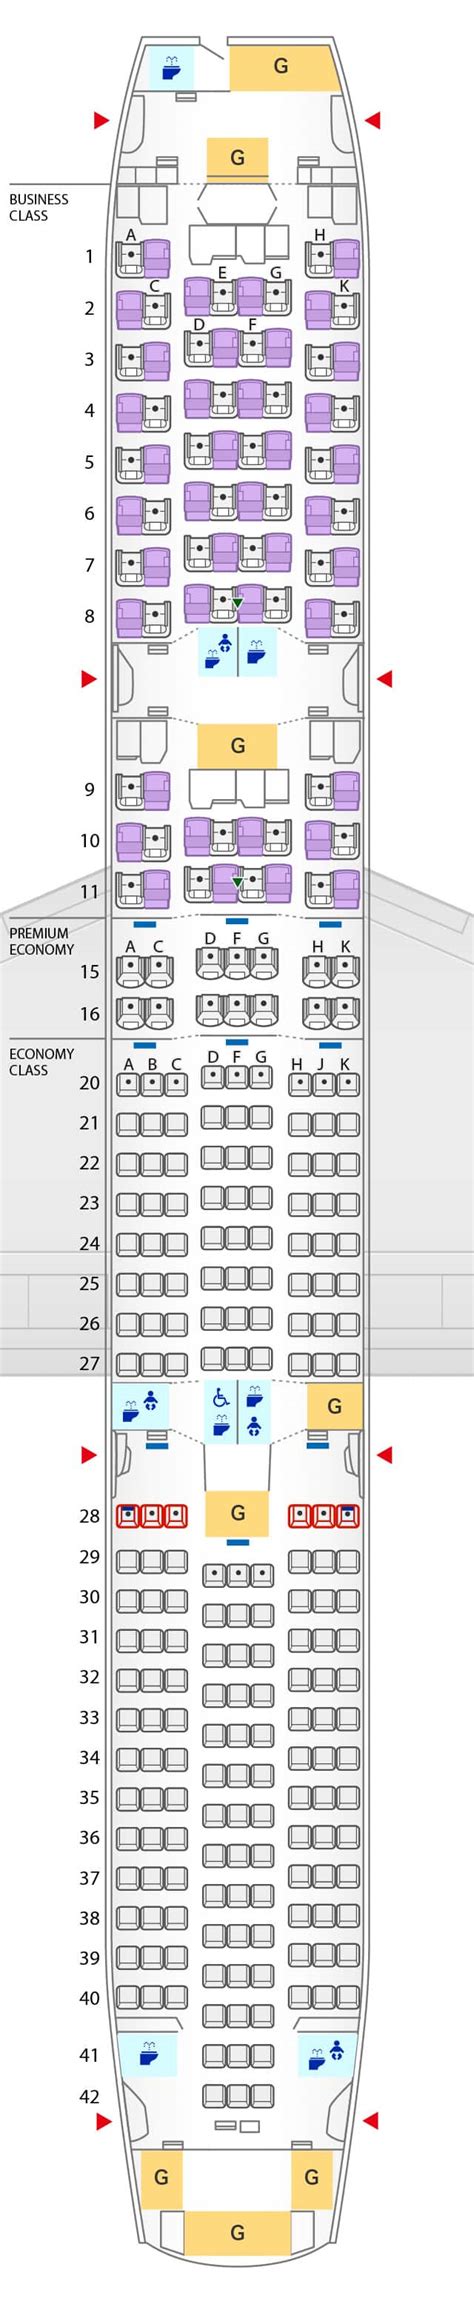 787-9 seat map. I was very disappointed with the economy seats on the Boeing 787-9, I was in seat 33C, having not flown long haul for several years, the last time being on a Malaysia 747-400, I felt for a flight of 13 hours the seat pitch and width were totally inadequate. 31inch seat pitch that seemed much tighter and 17.5 inch width. 